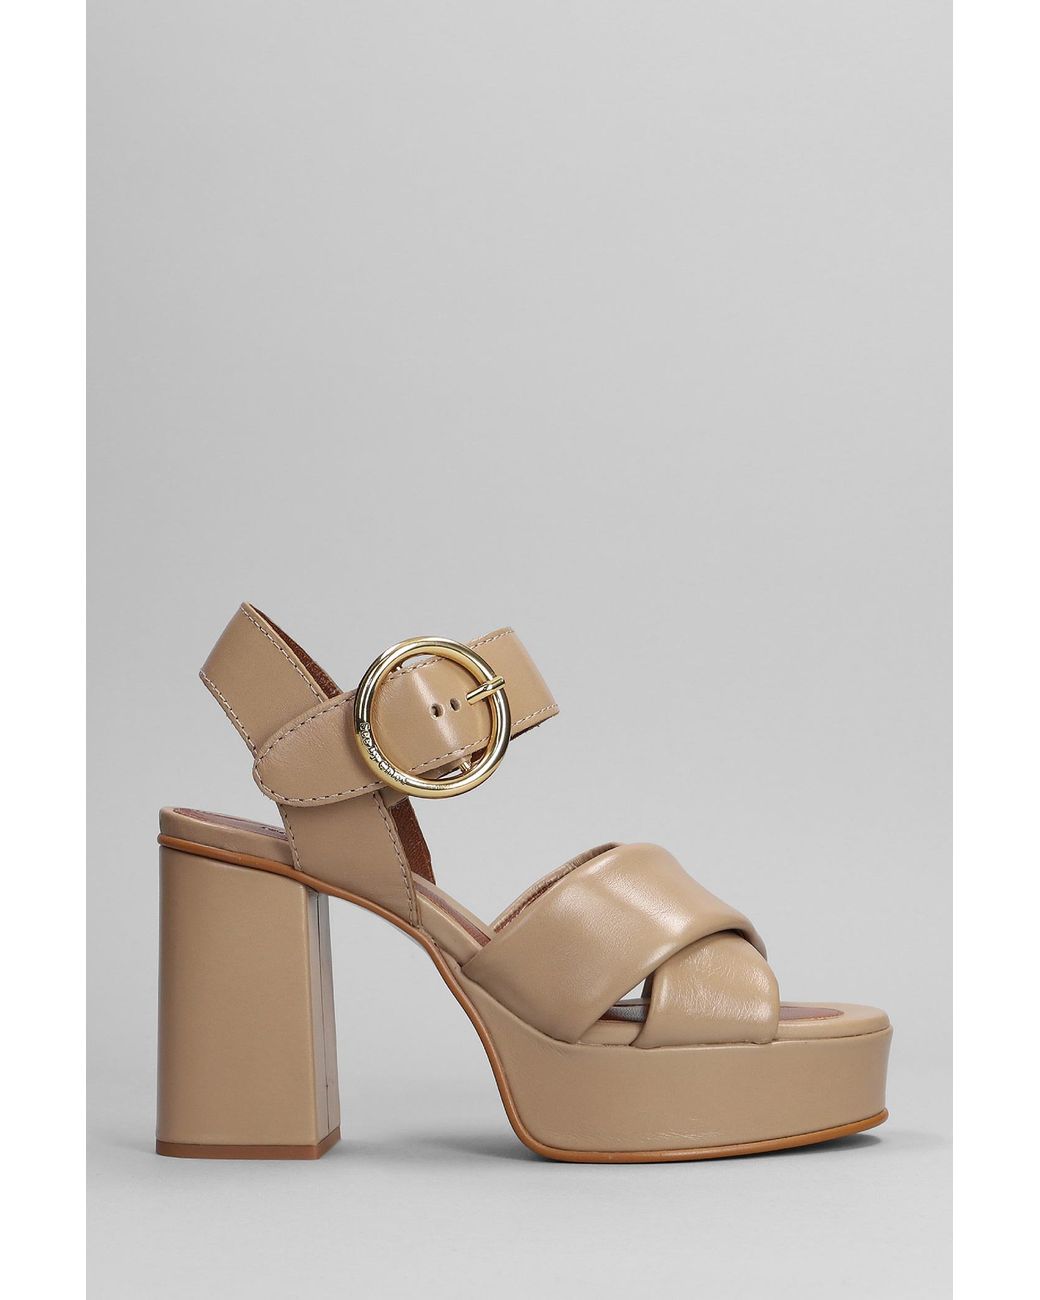 See By Chloé Lyna Sandals In Beige Leather in Natural | Lyst